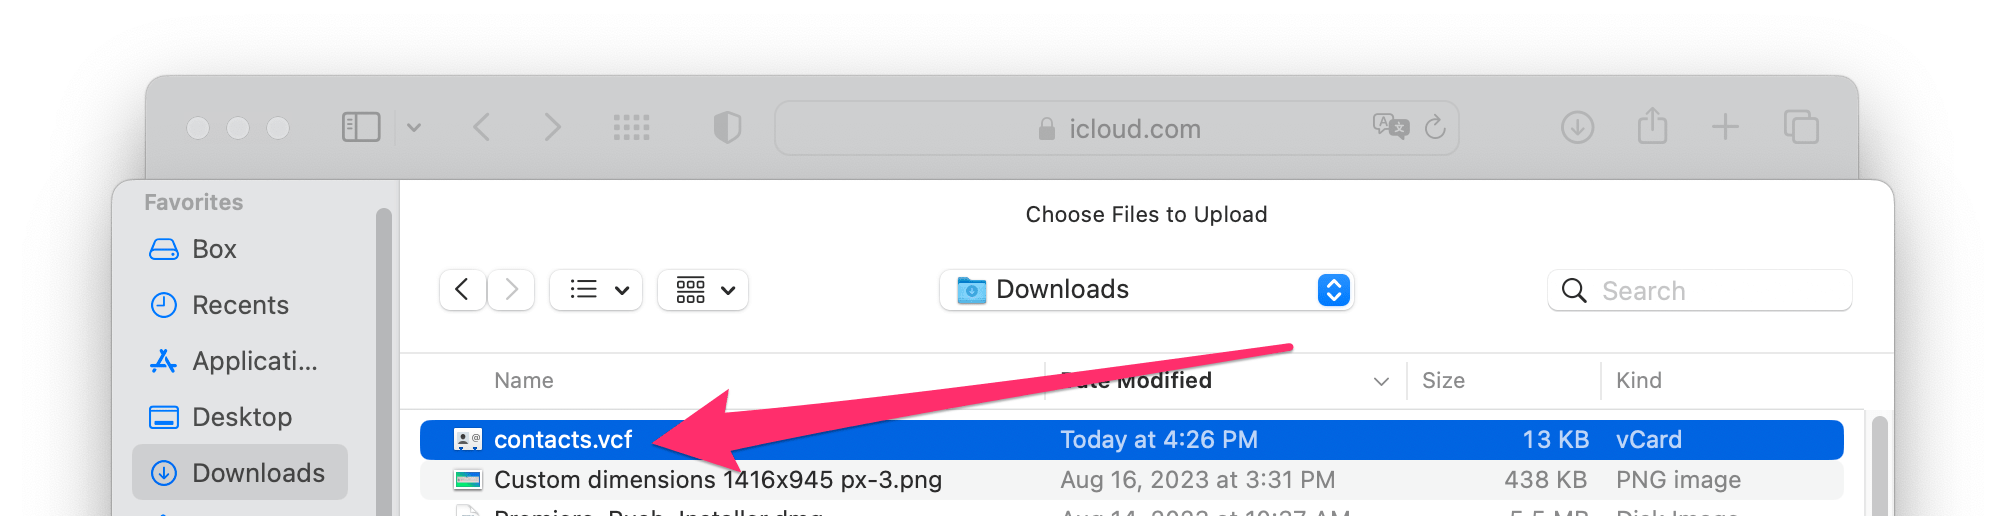 contacts.vcf in downloads on Mac